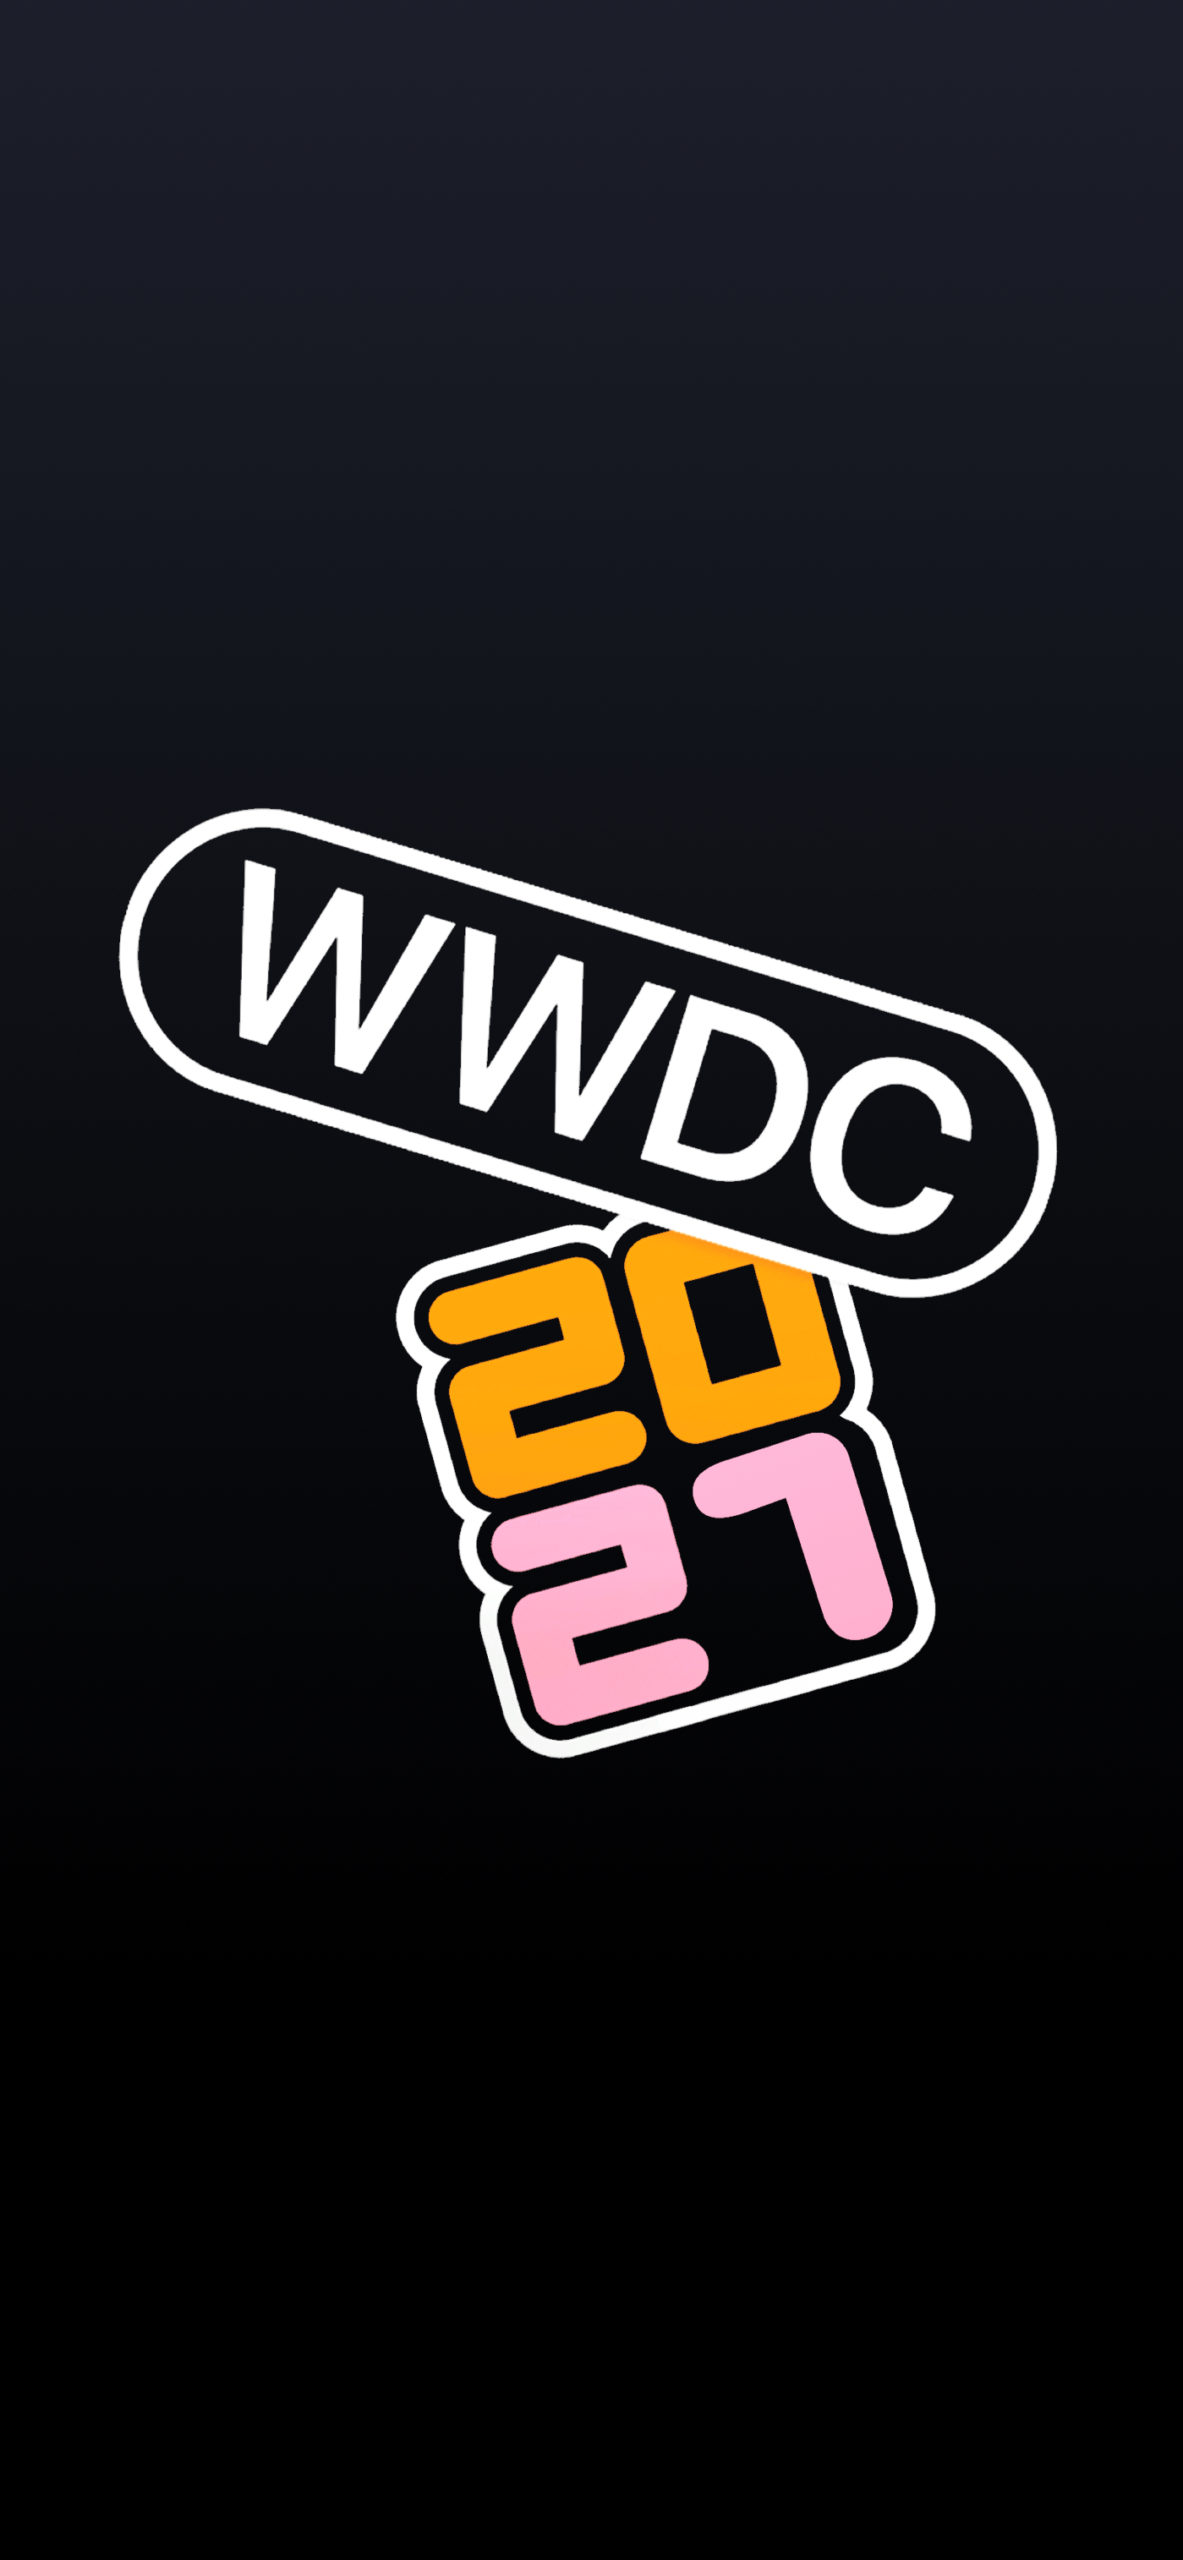 Download WWDC 2021 Wallpapers for iPhone, Mac or Apple Watch